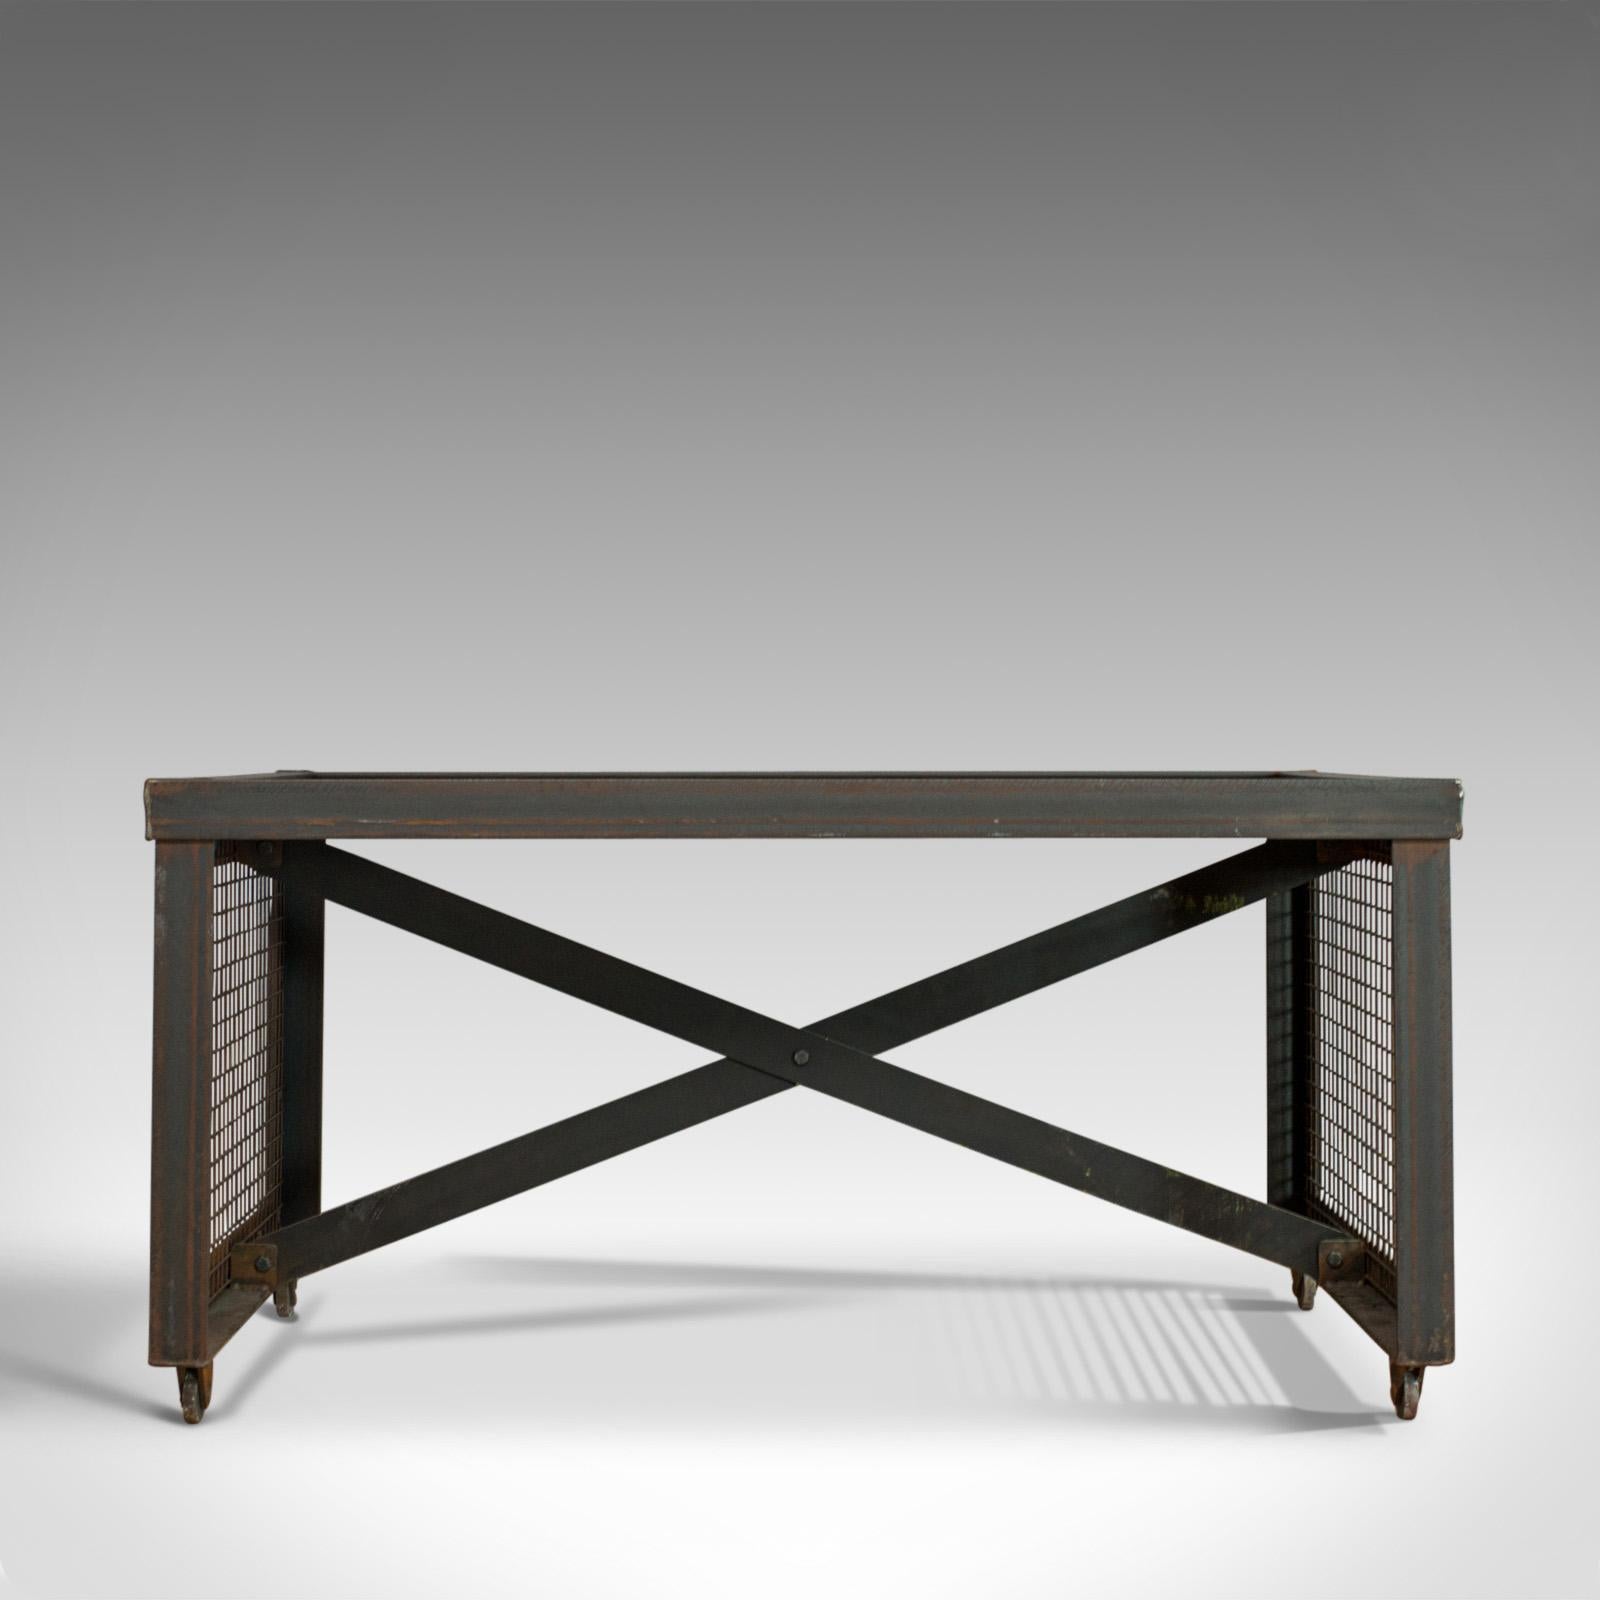 Vintage Industrial Coffee Table, English, Foundry Steel, Oak, 20th Century In Good Condition For Sale In Hele, Devon, GB